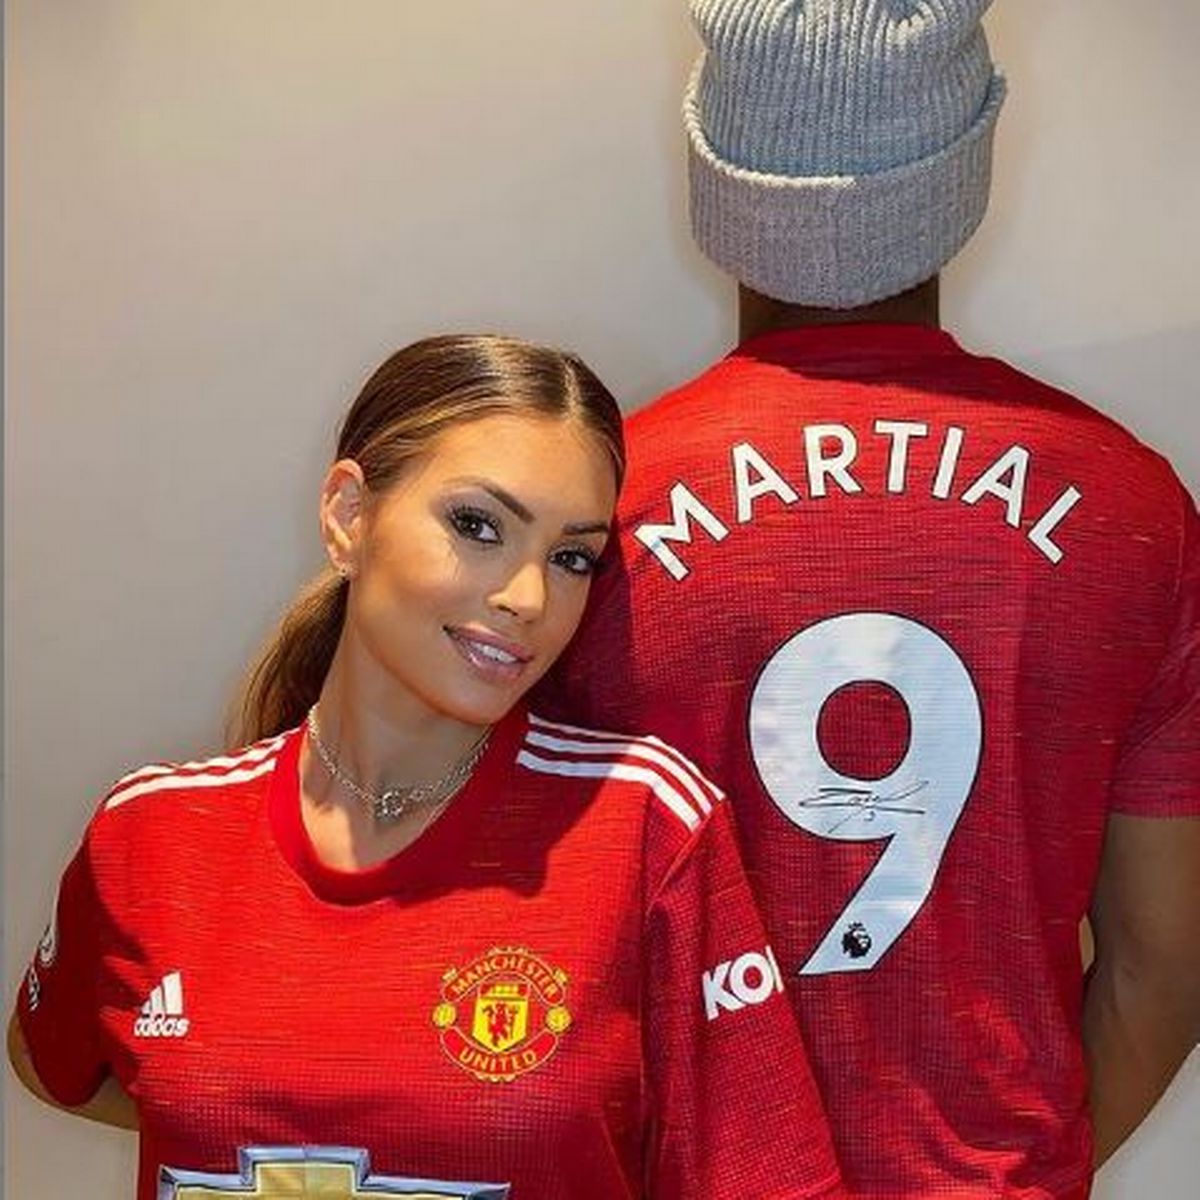 EPL: He has never been injured - Martial’s wife hits back at Solskjaer